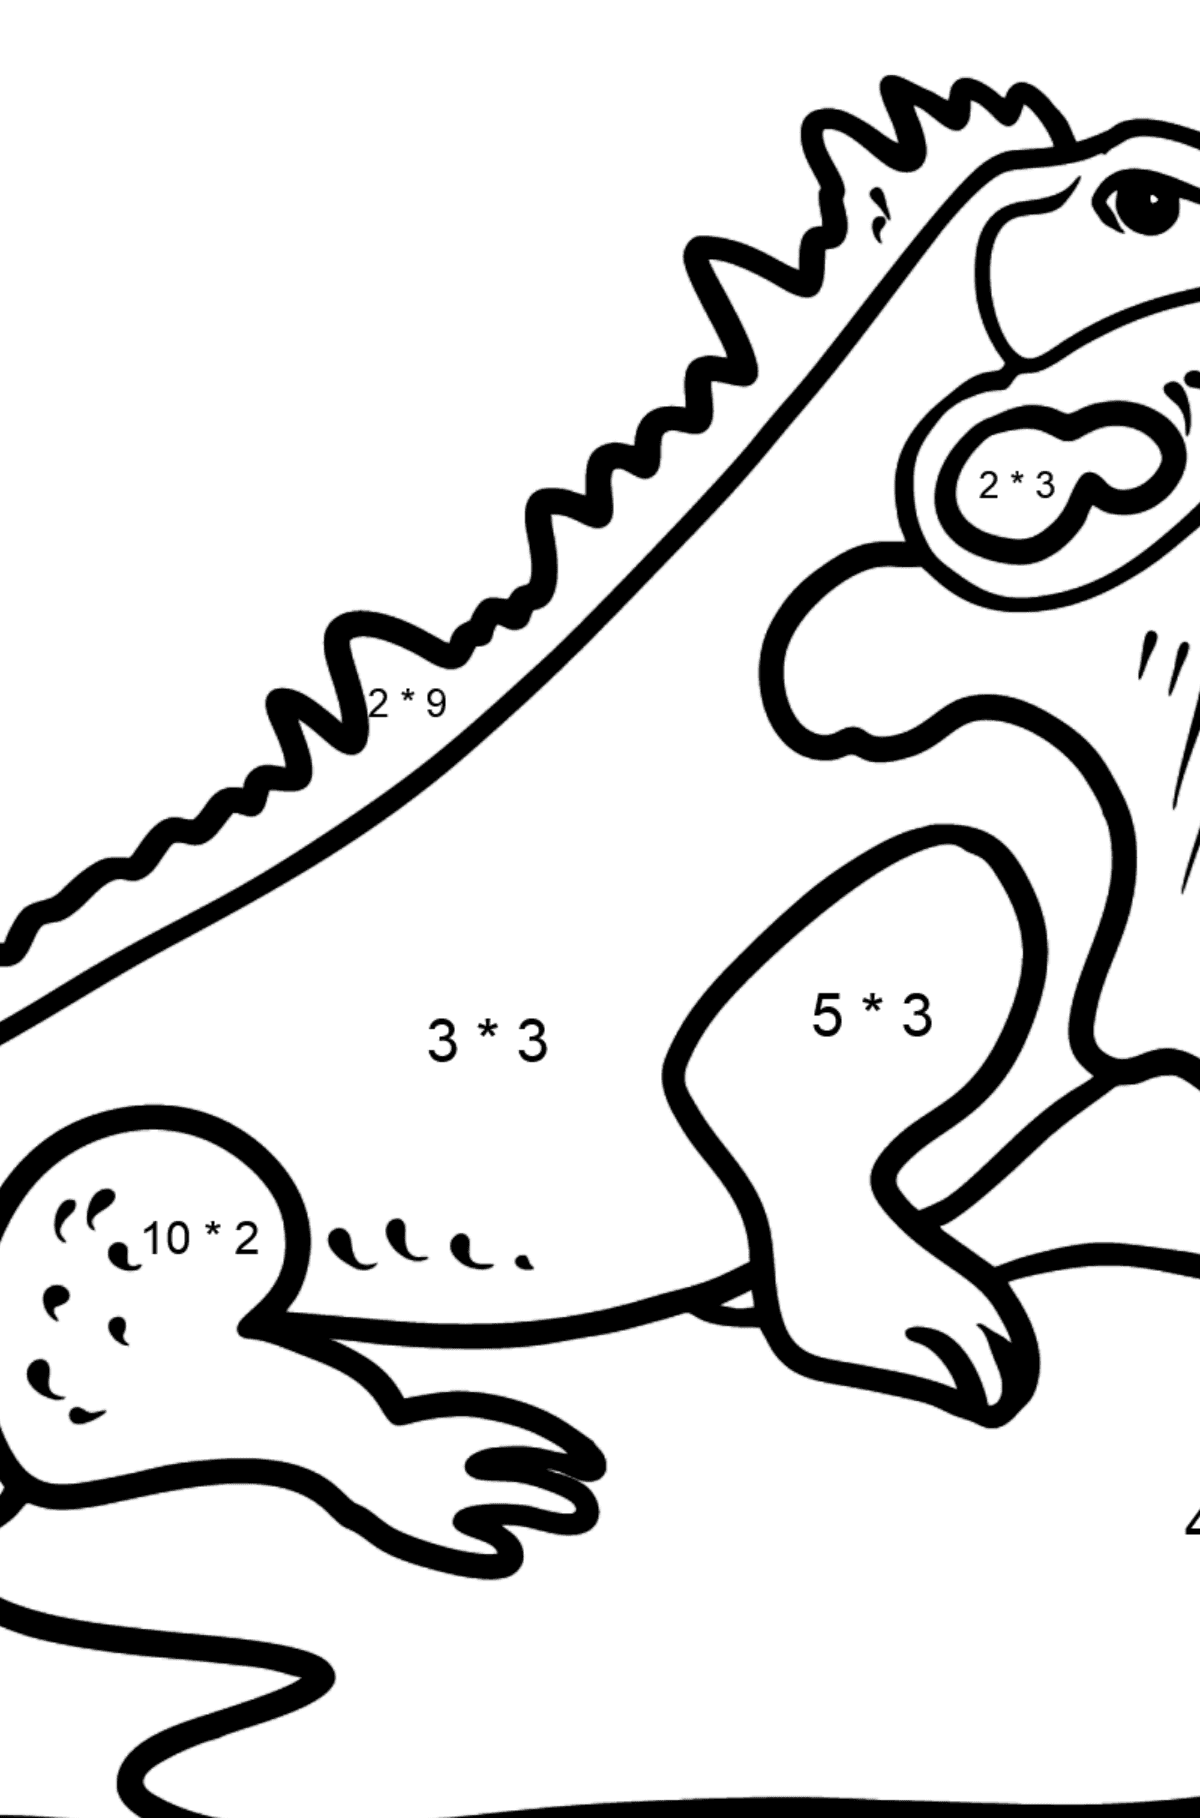 Spanish Letter I coloring pages - IGUANA - Math Coloring - Multiplication for Kids